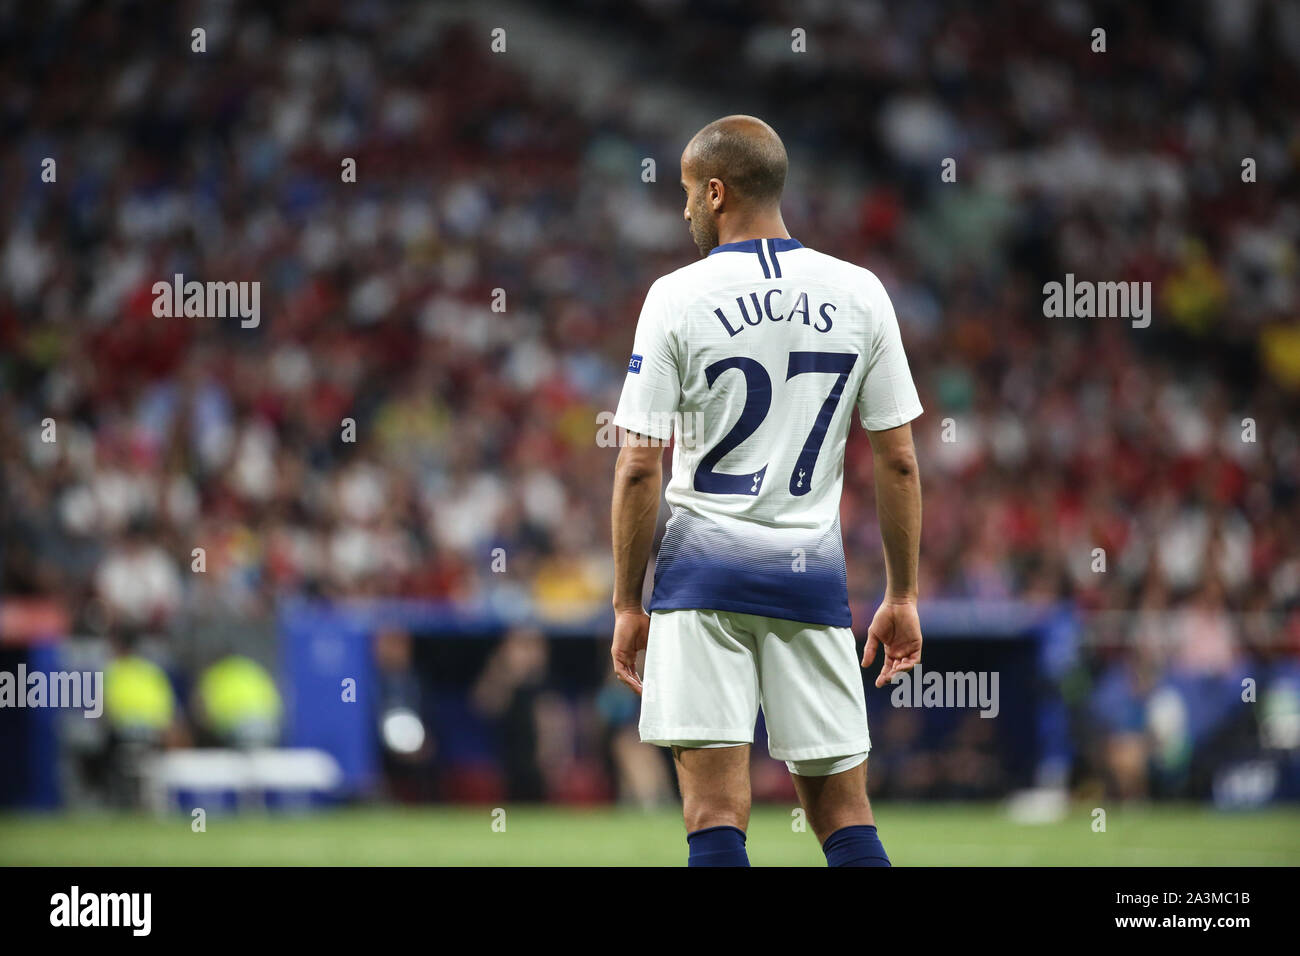 MADRID, SPAIN - JUNE 01, 2019: Lucas Moura(Tottenham) pictured during the final of the 2019/20 UEFA Champions League Final. Stock Photo